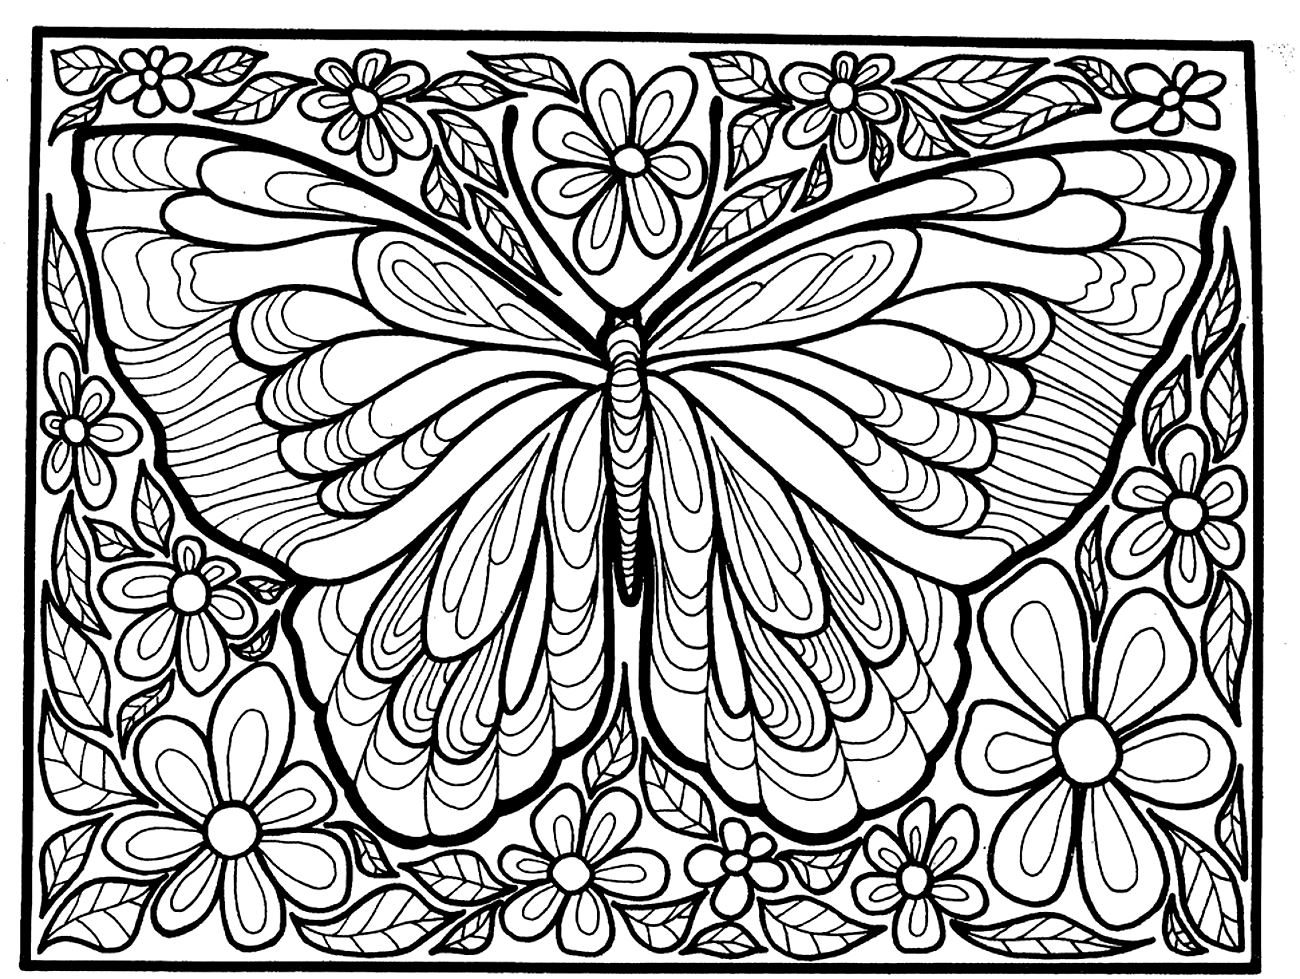 Insect - Coloring Pages for adults : coloring-adult-difficult-big ...